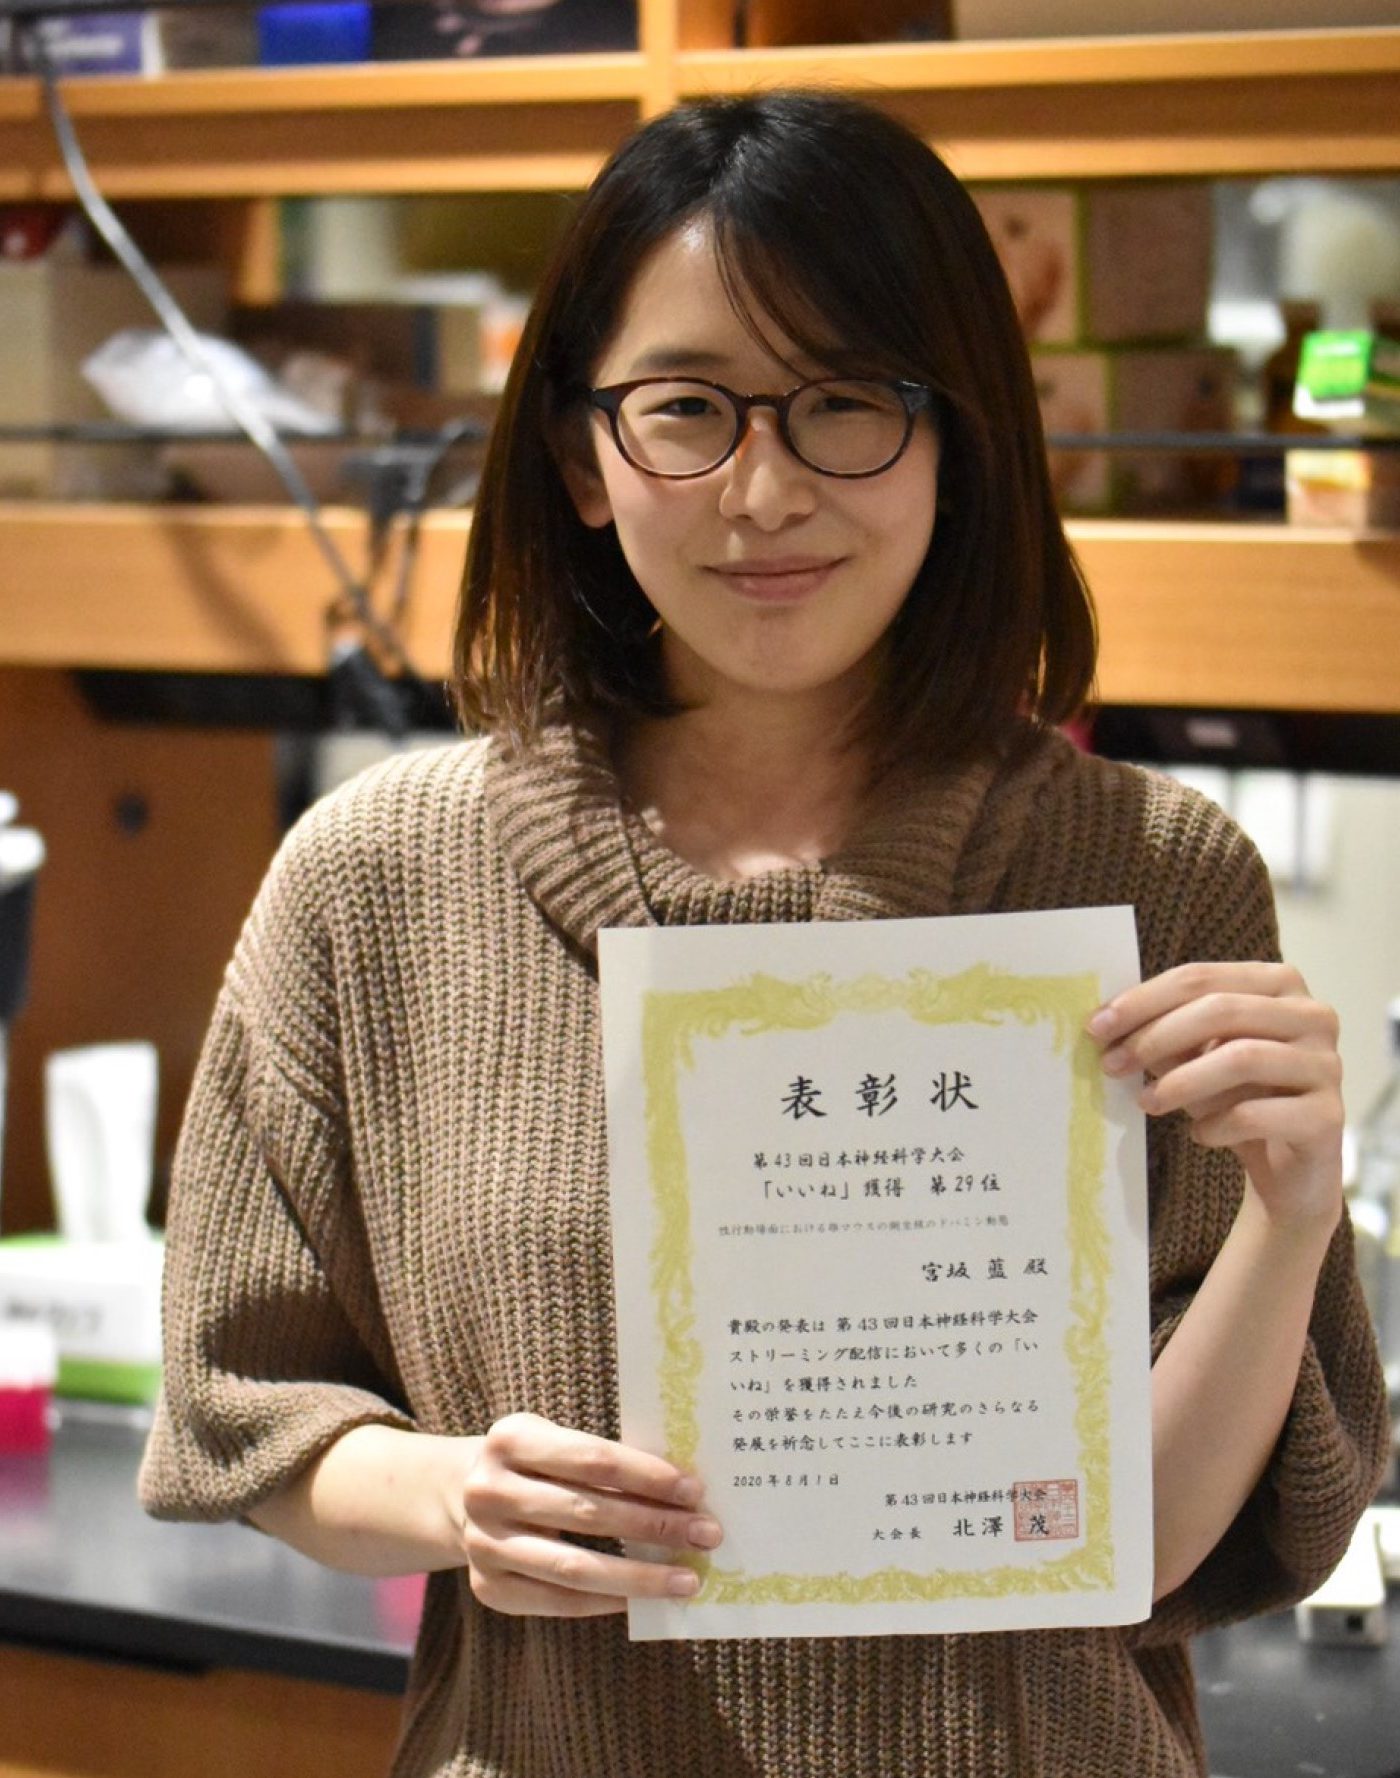 Ms. Ai Miyasaka, 2nd year student, performed a poster presentation as the lead author at the 43rd Annual Meeting of the Japan Neuroscience Society, and received an award for receiving many likes on streaming site.